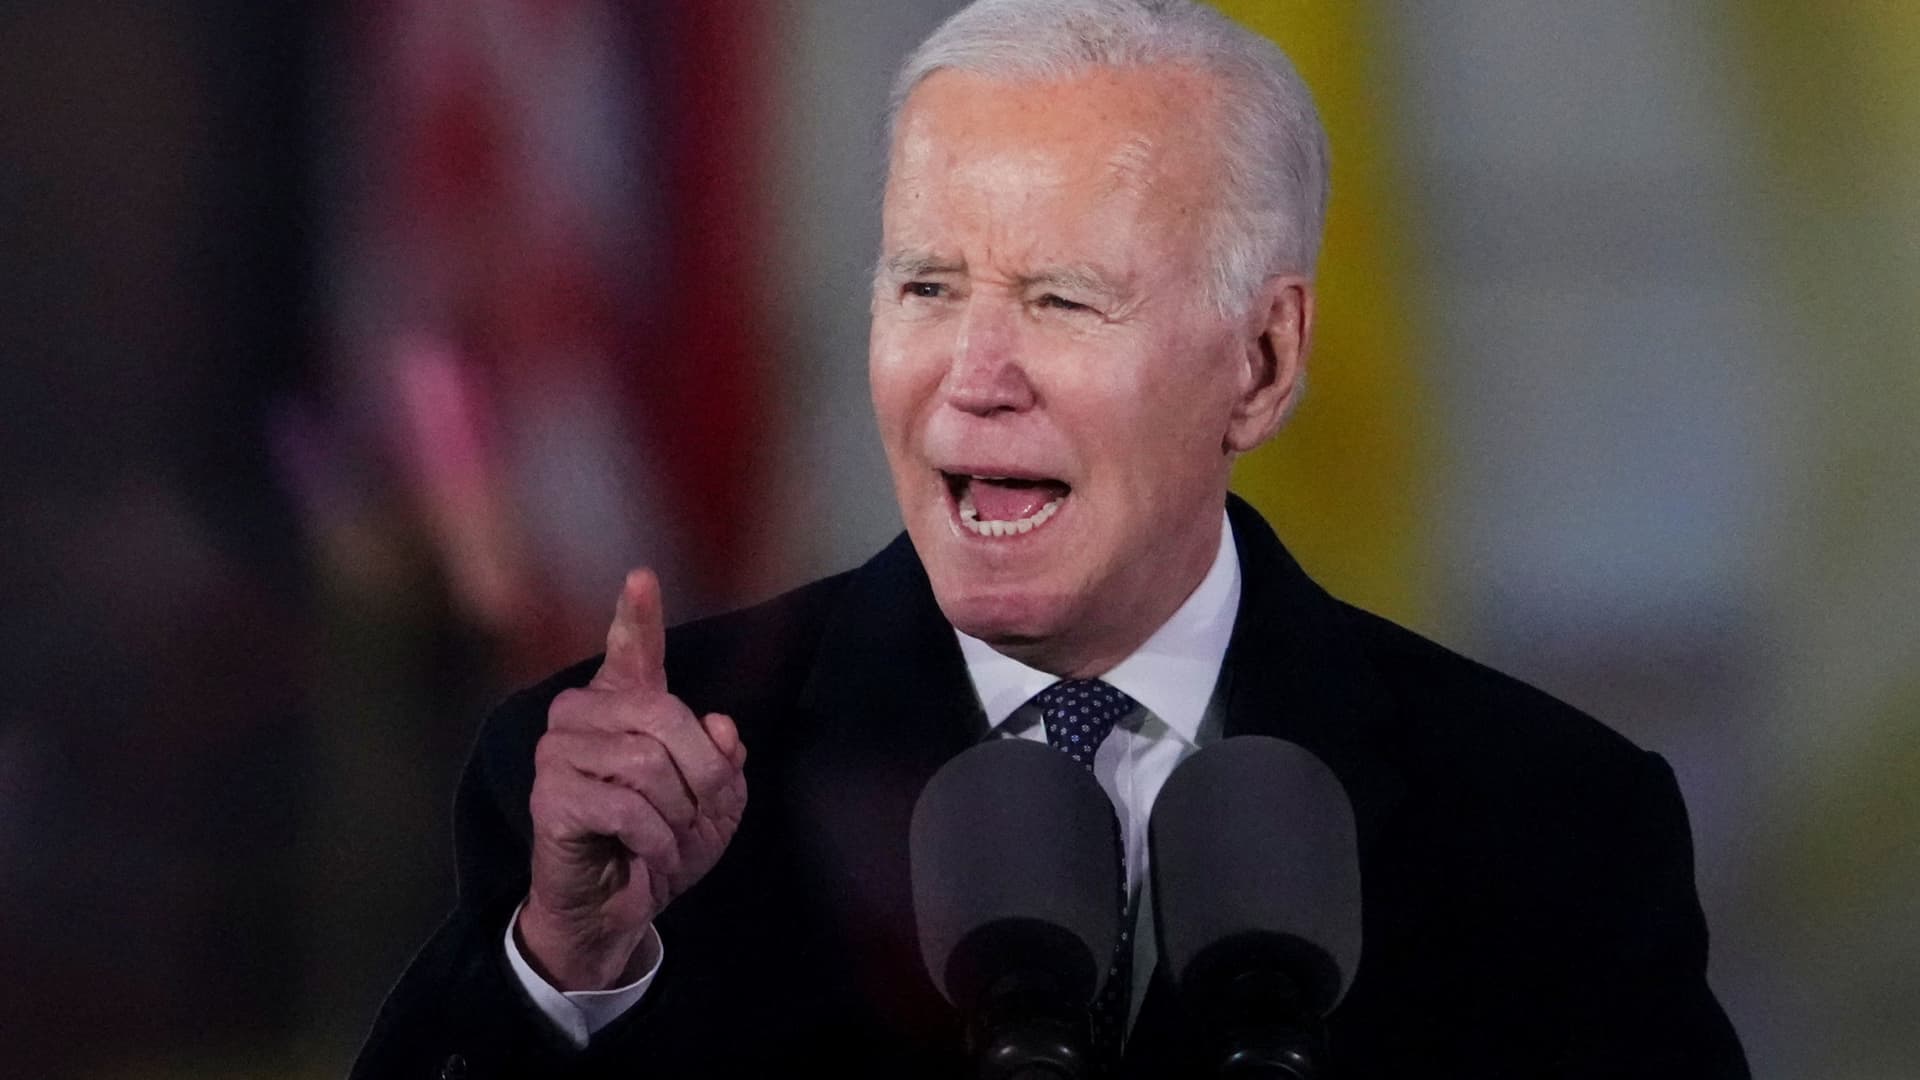 U.S. President Joe Biden delivers remarks ahead of the one year anniversary of Russia’s invasion of Ukraine, during an event outside the Royal Castle, in Warsaw, Poland, February 21, 2023.